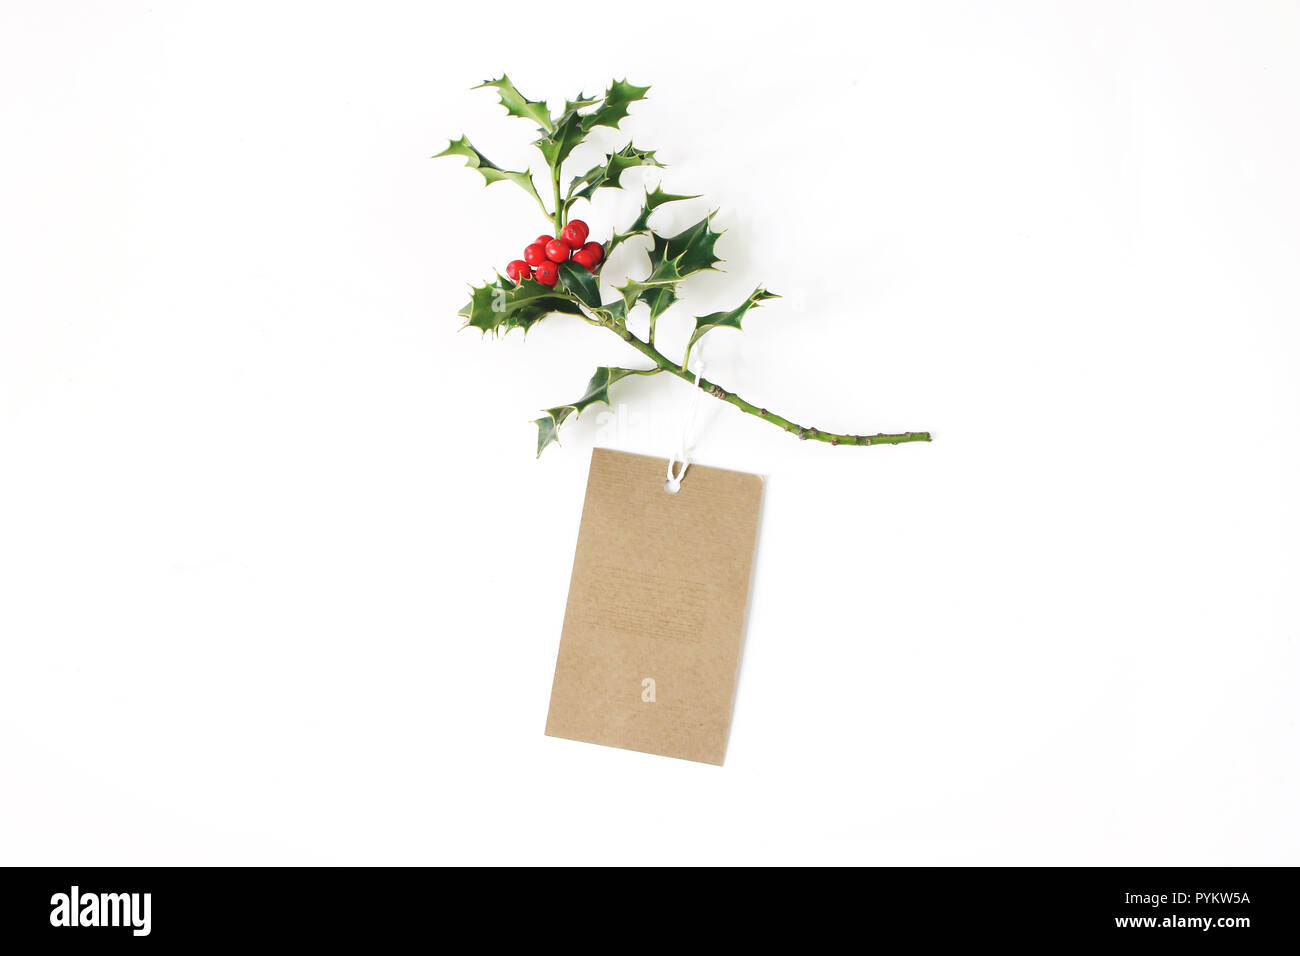 Close-up of craft paper gift tag with rope and green holly branch with red berries isolated on white table background. Christmas composition, top view. Stock Photo